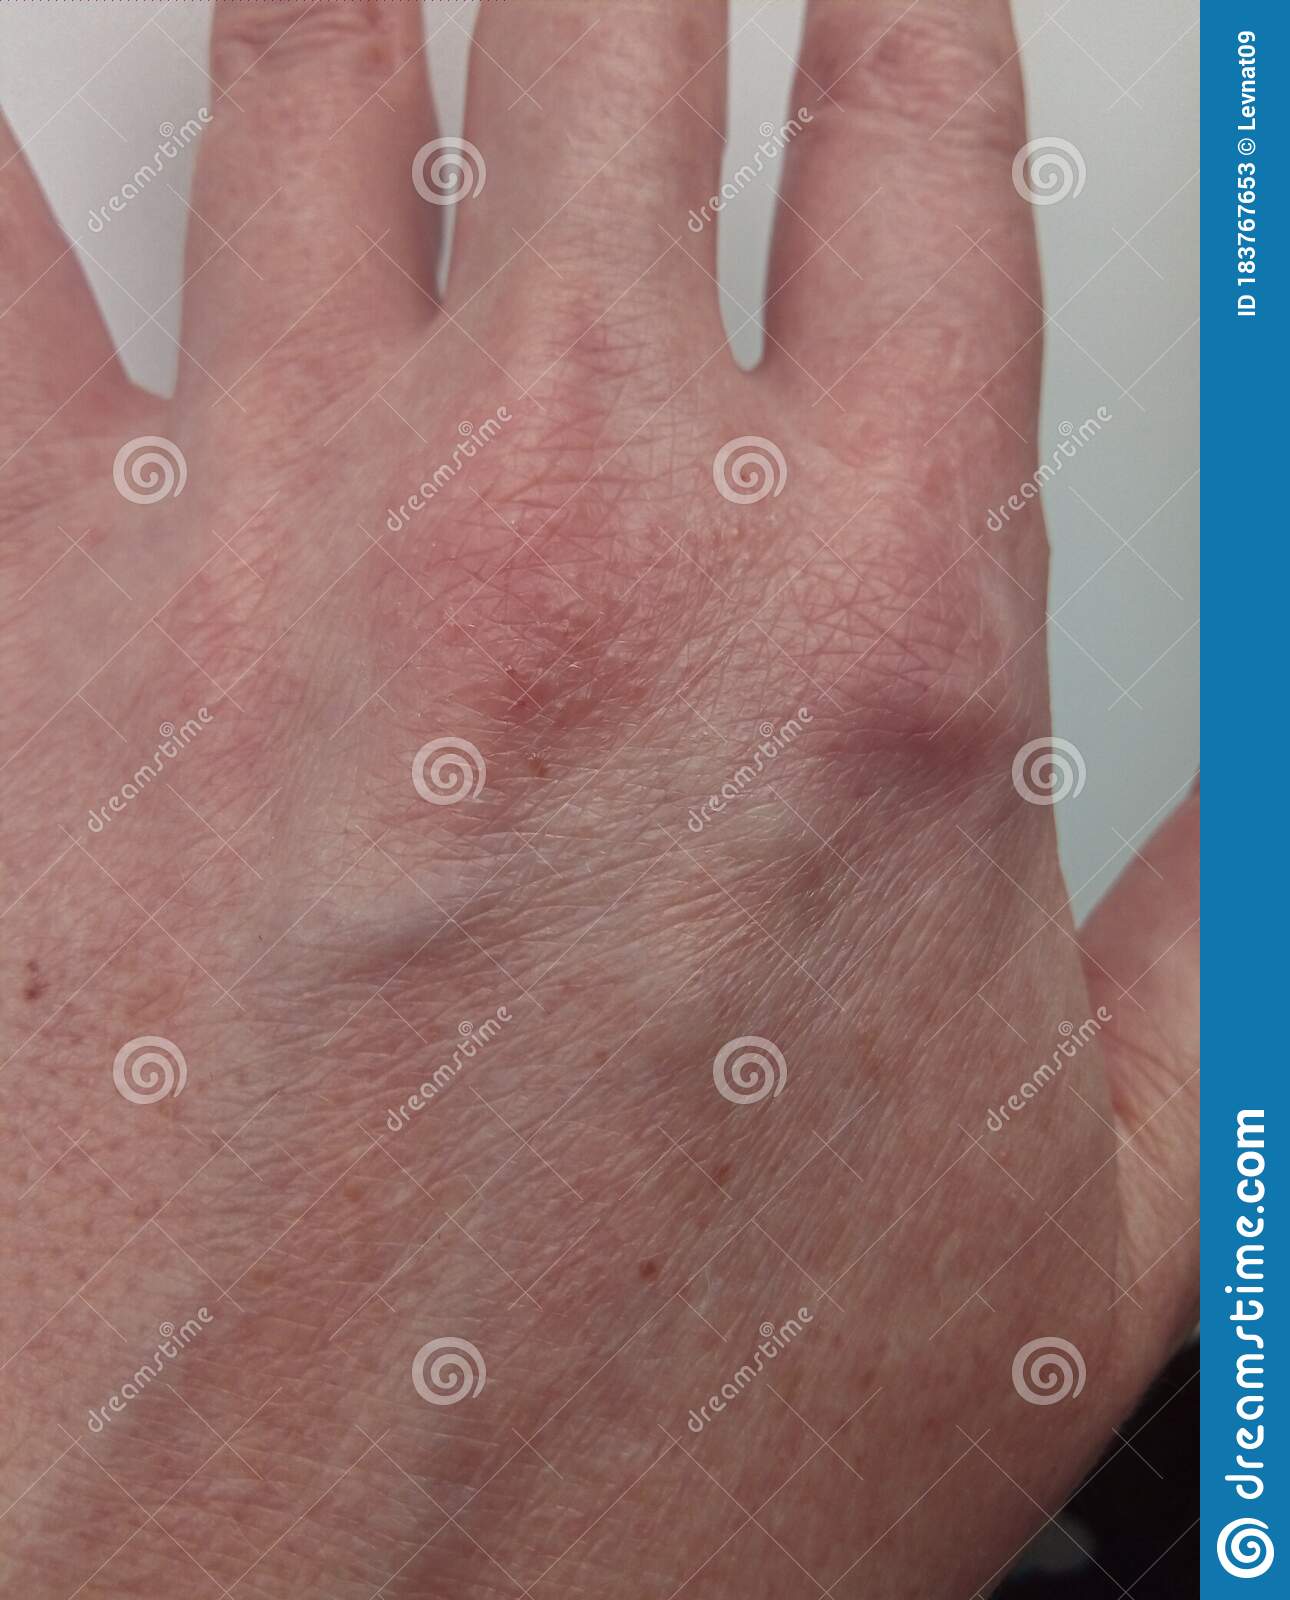 Rash and Hives on the Skin of the Back of the Female Hand, Allergic ...